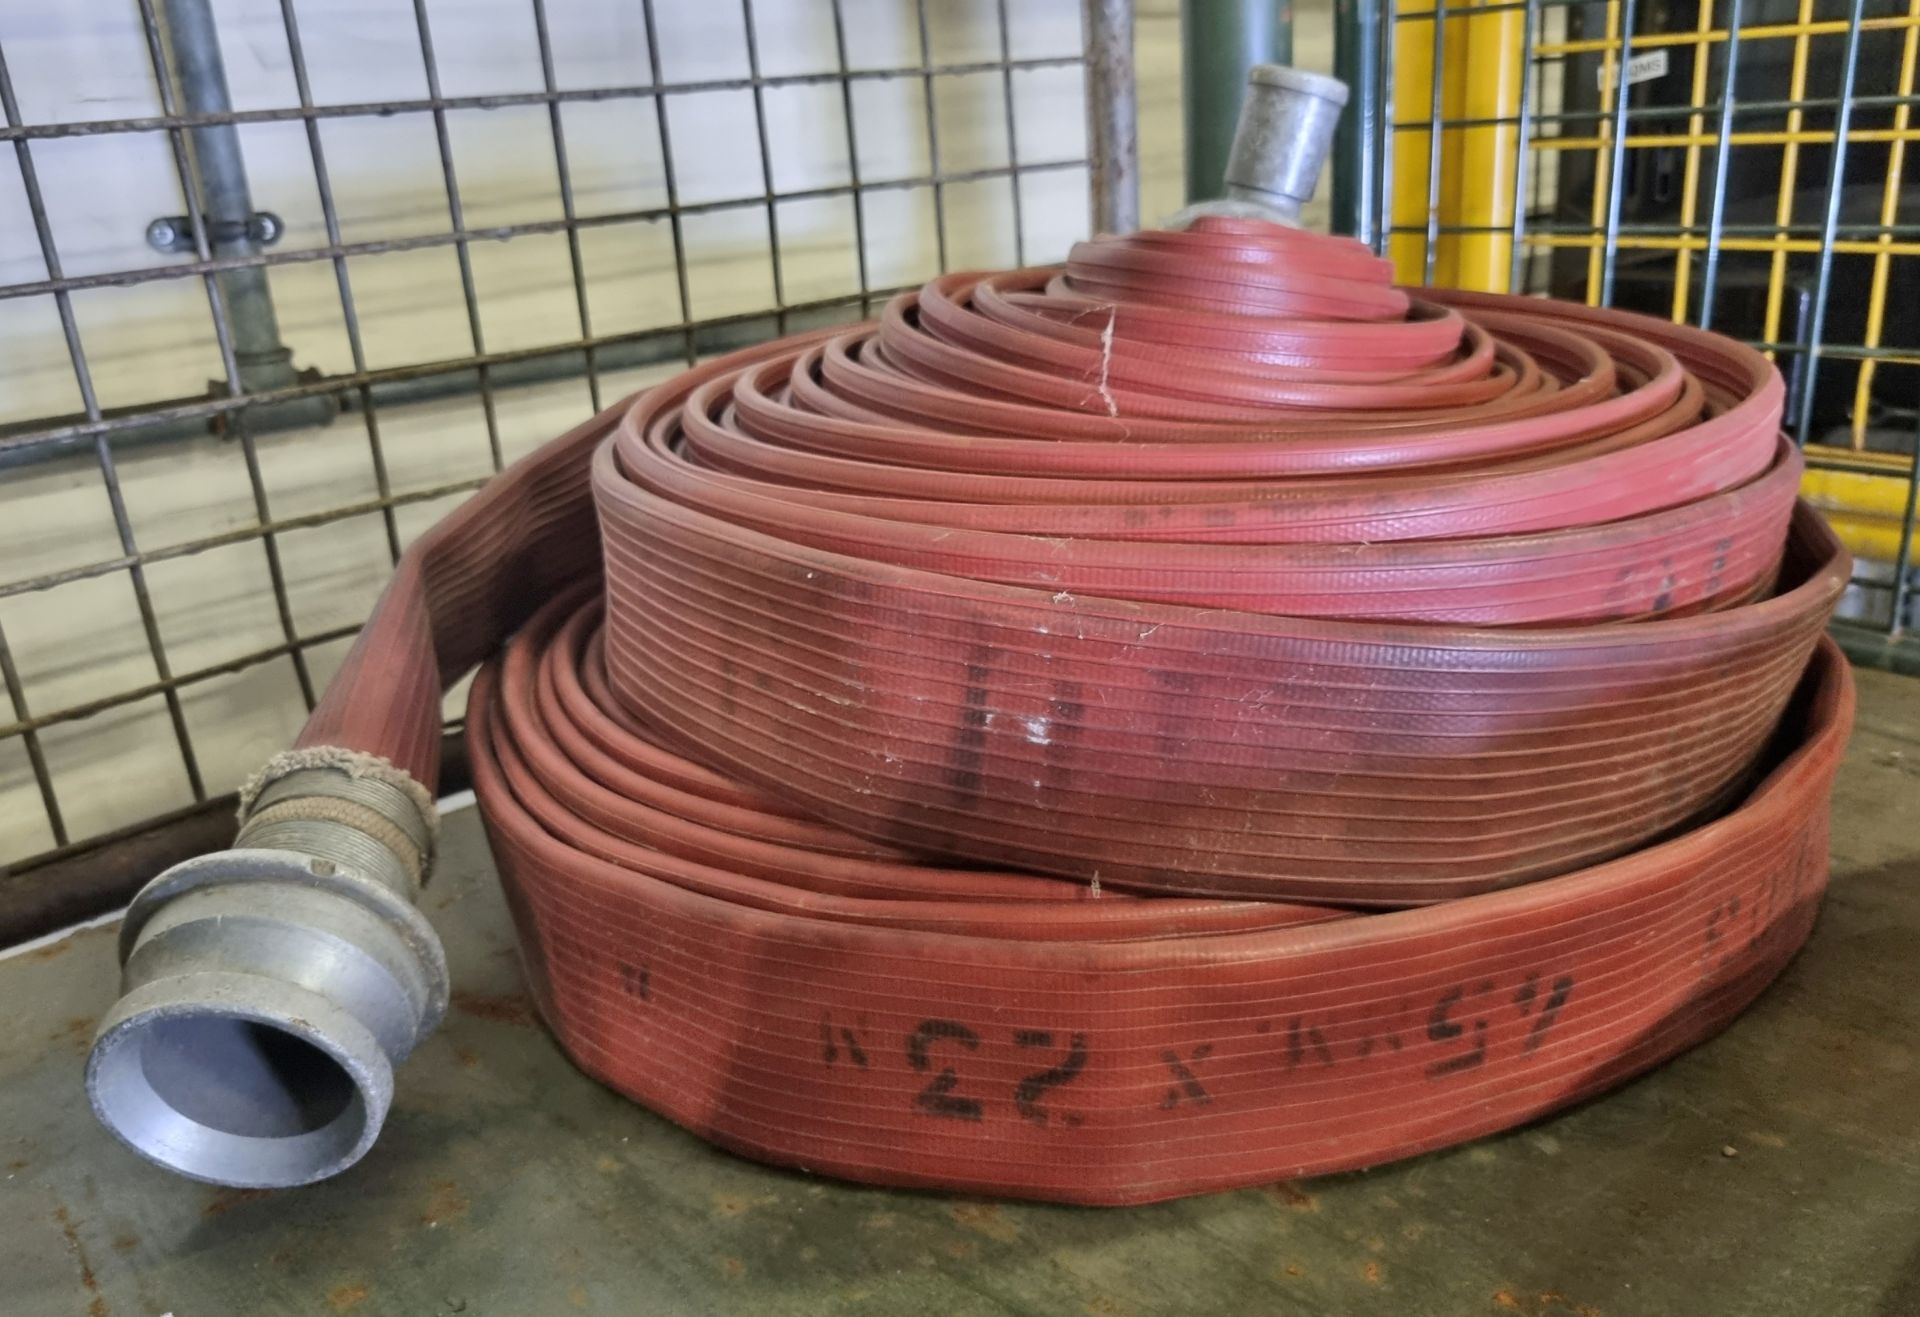 2x Angus Duraline 45mm lay flat hoses with couplings - approx 23m in length, Red lay flat hose - Image 4 of 4